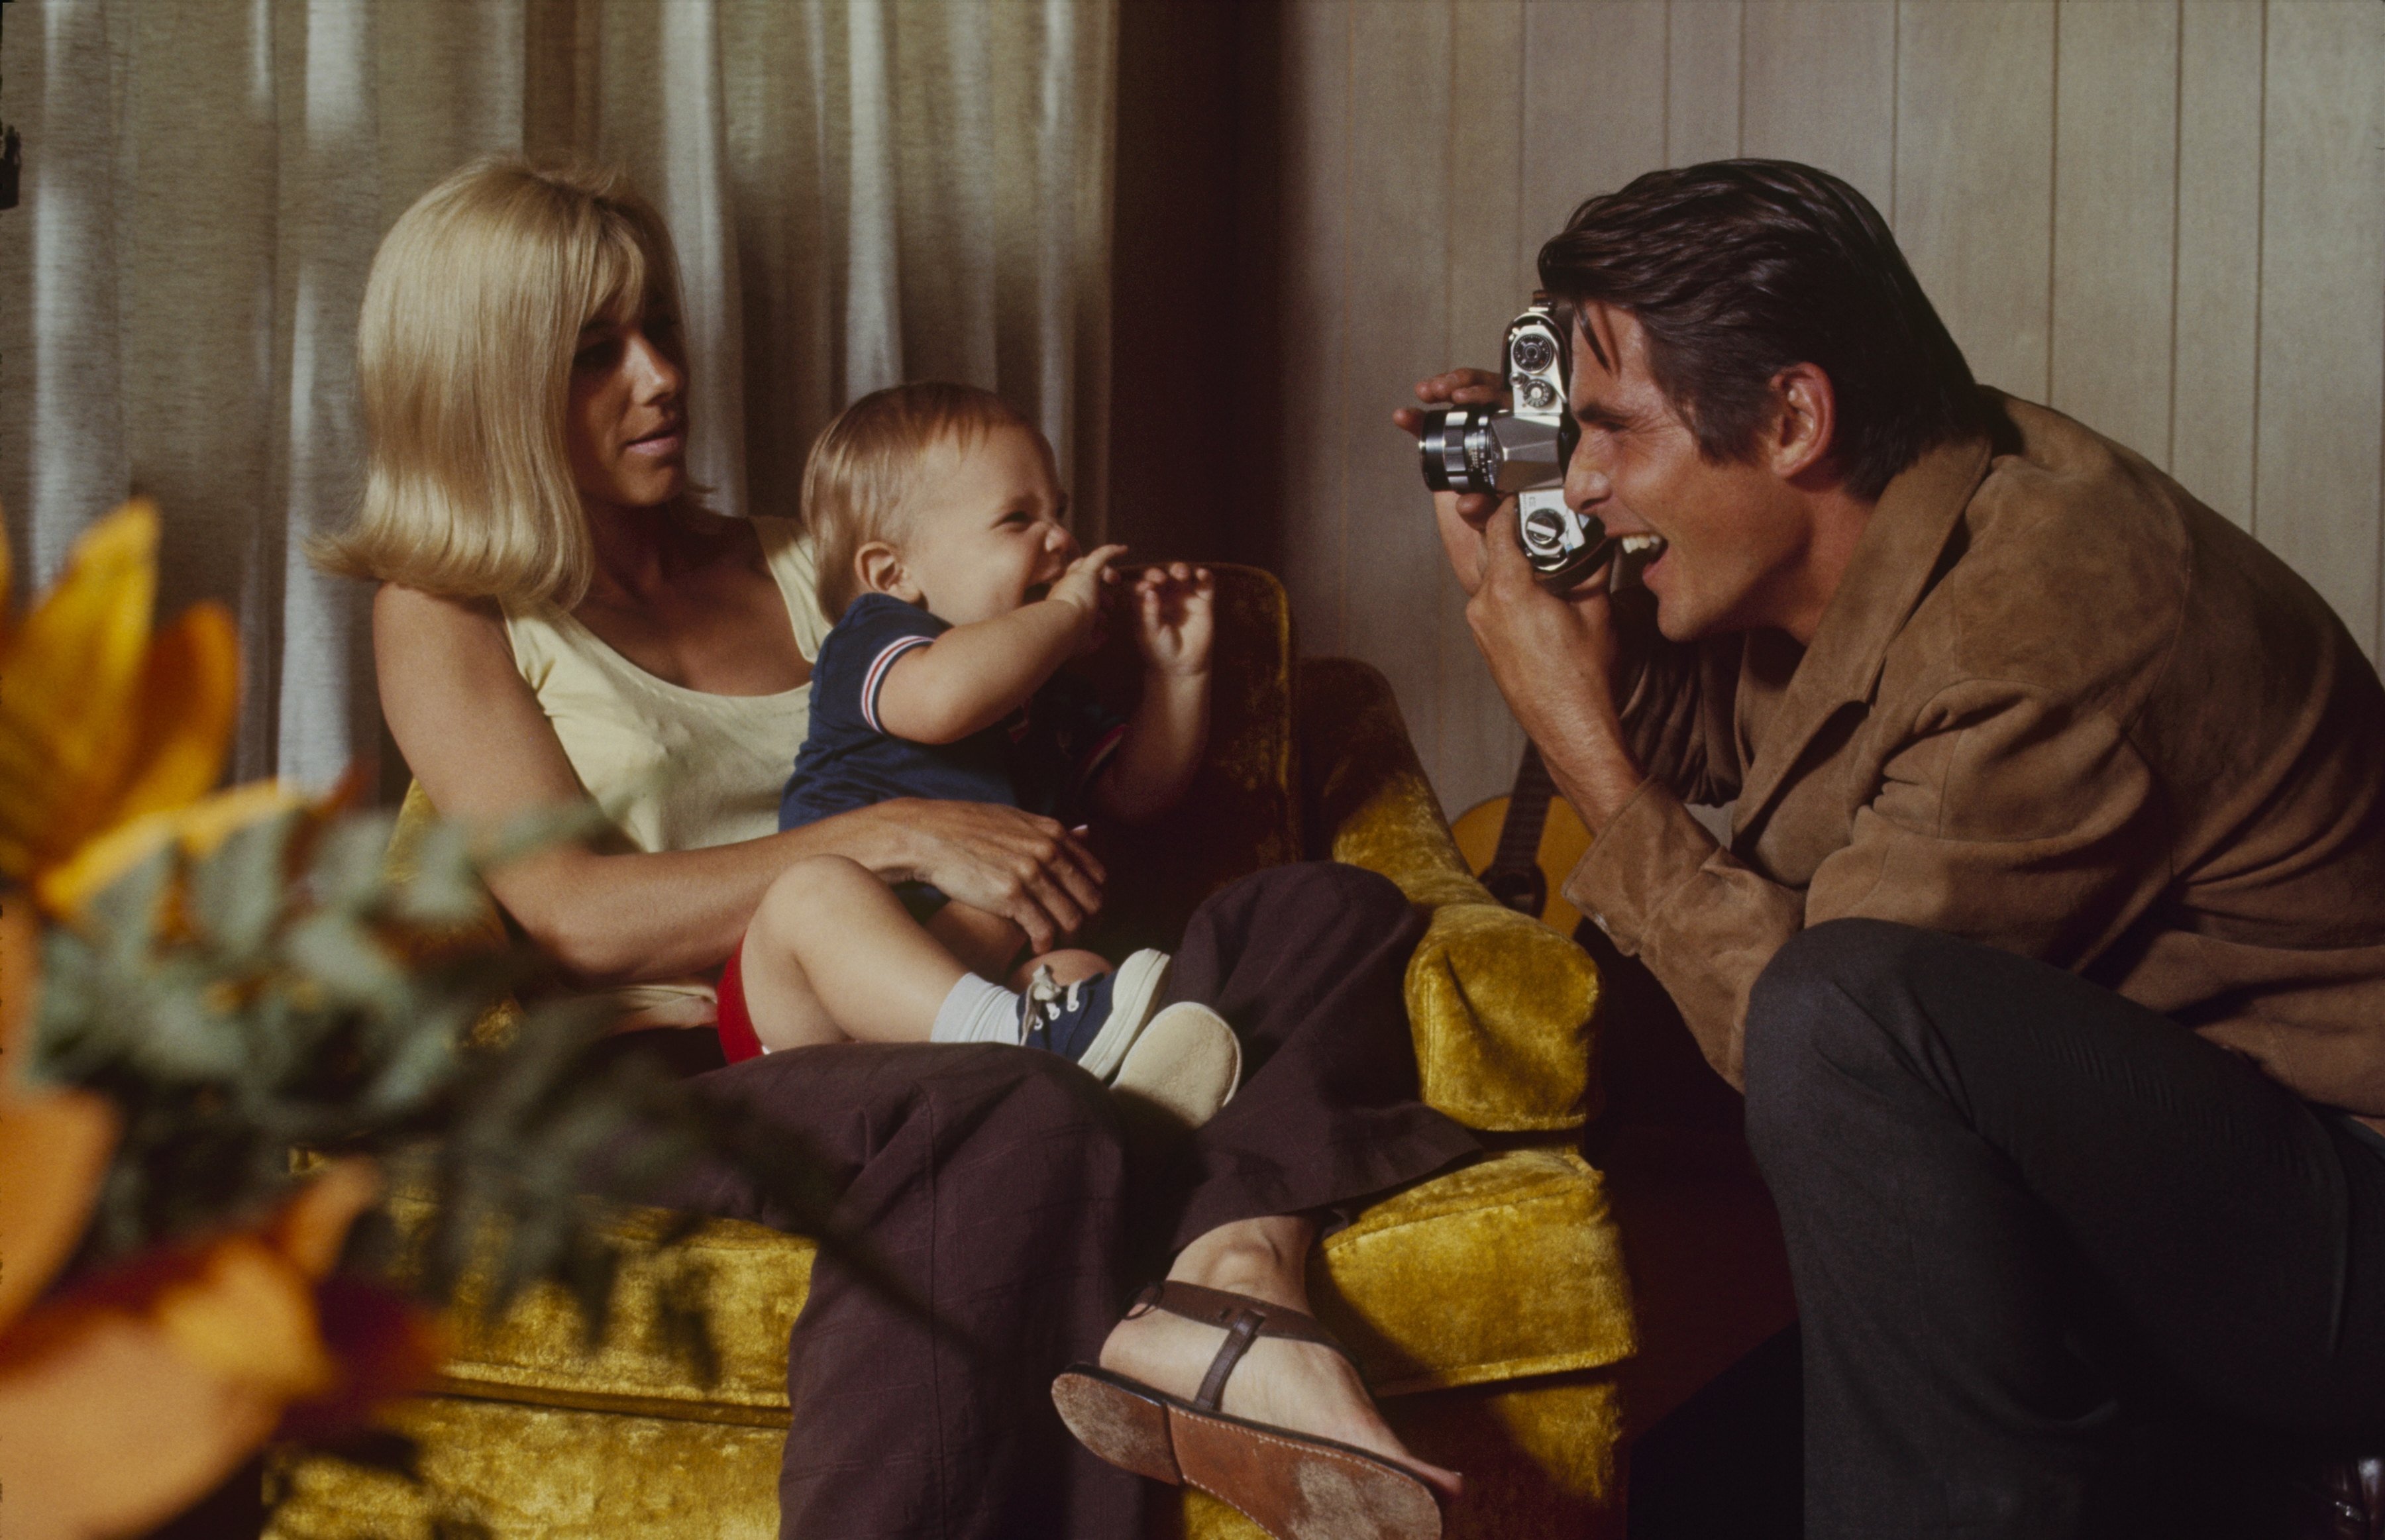 James Brolin, Jane Cameron Agee, and Josh Brolin in a "Home Layout" feature with the airdate of October 1, 1969. | Source: Getty Images